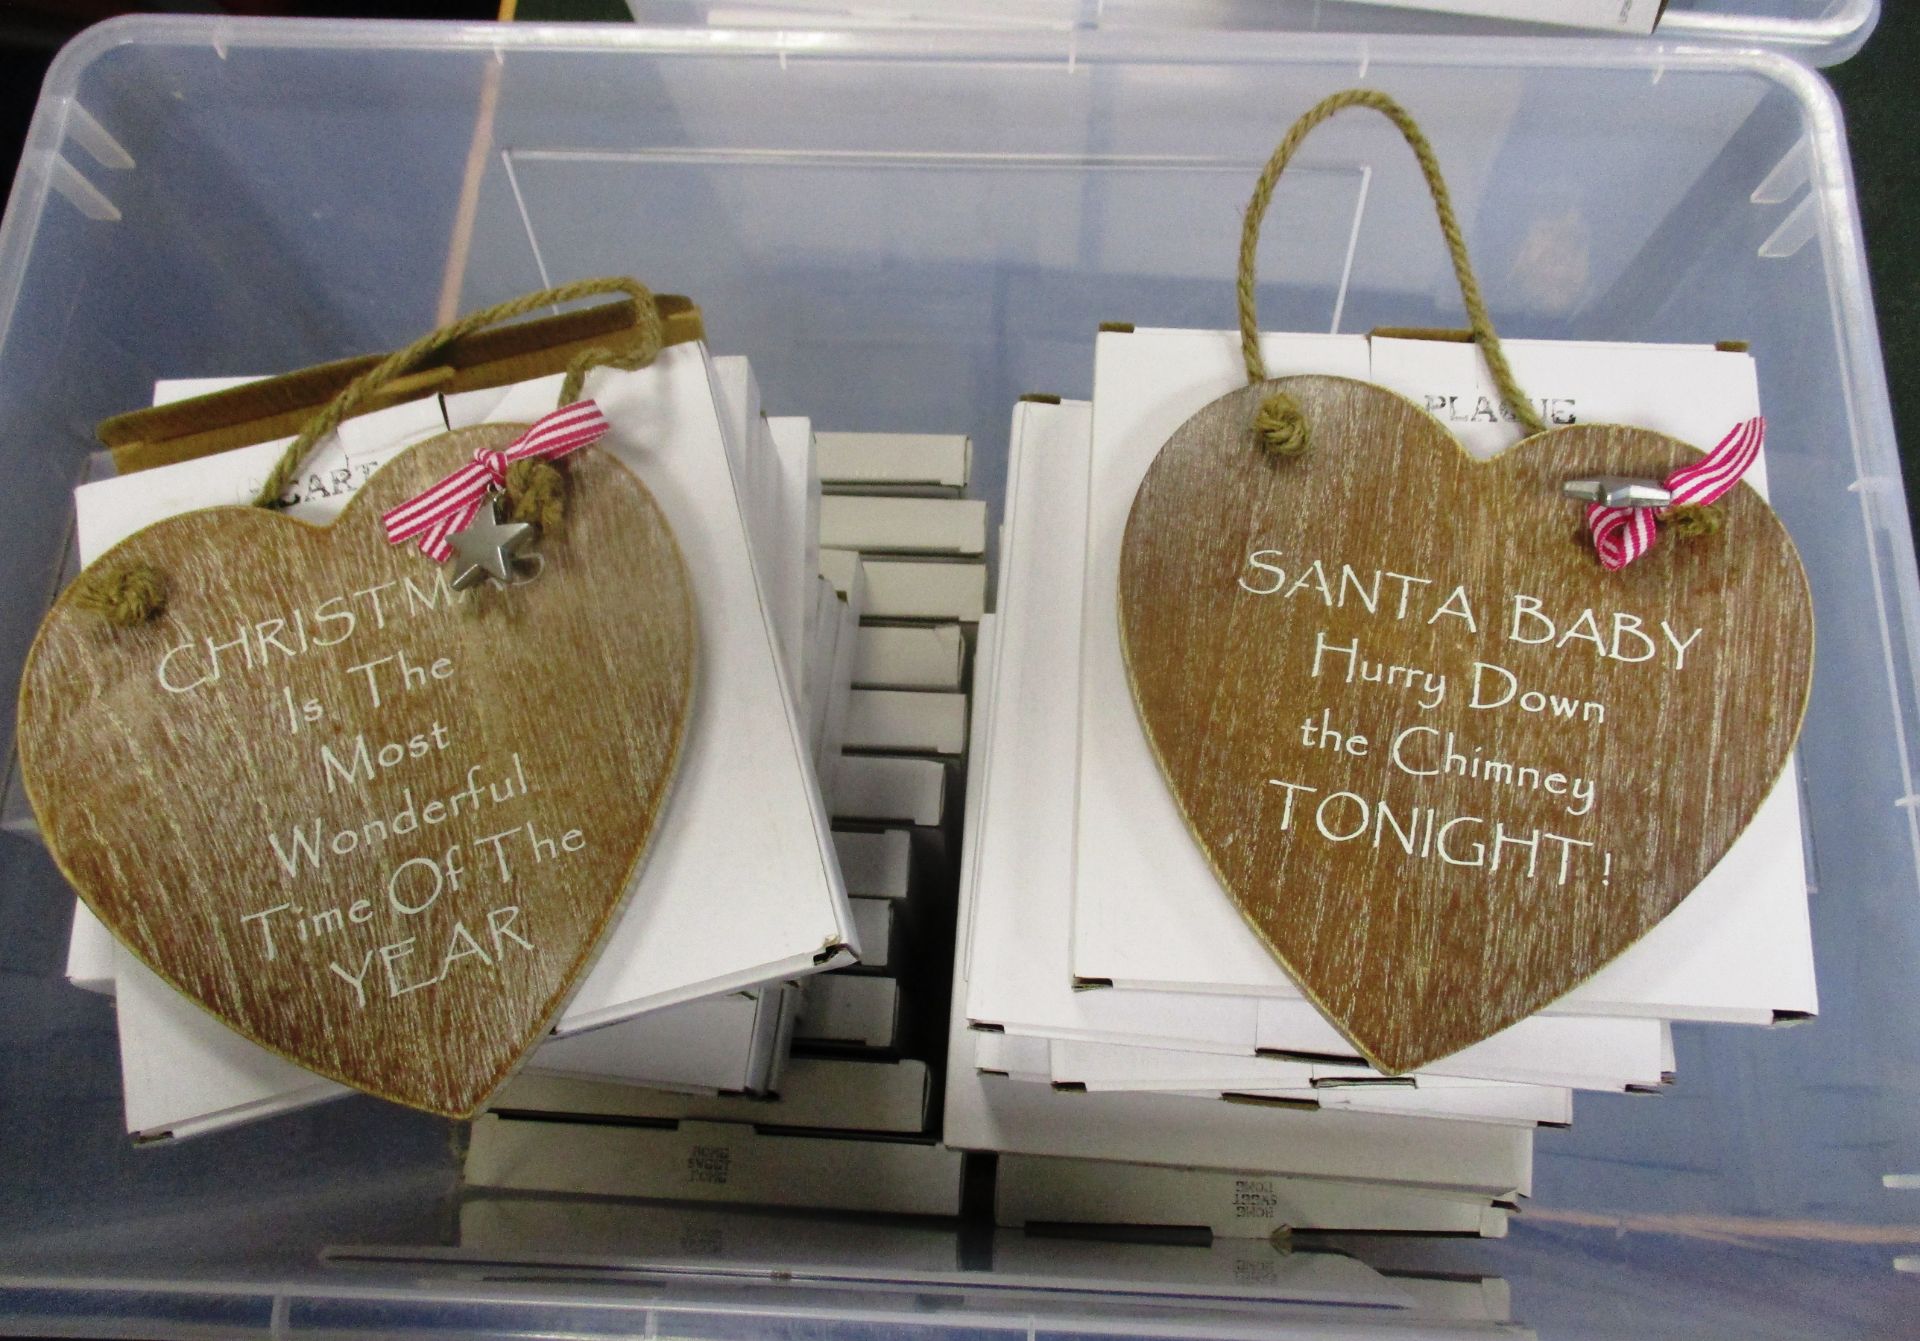 38 x wooden heart shaped Christmas plaques - 35 x 'Santa baby hurry down the chimney tonight' and 3 - Image 2 of 2